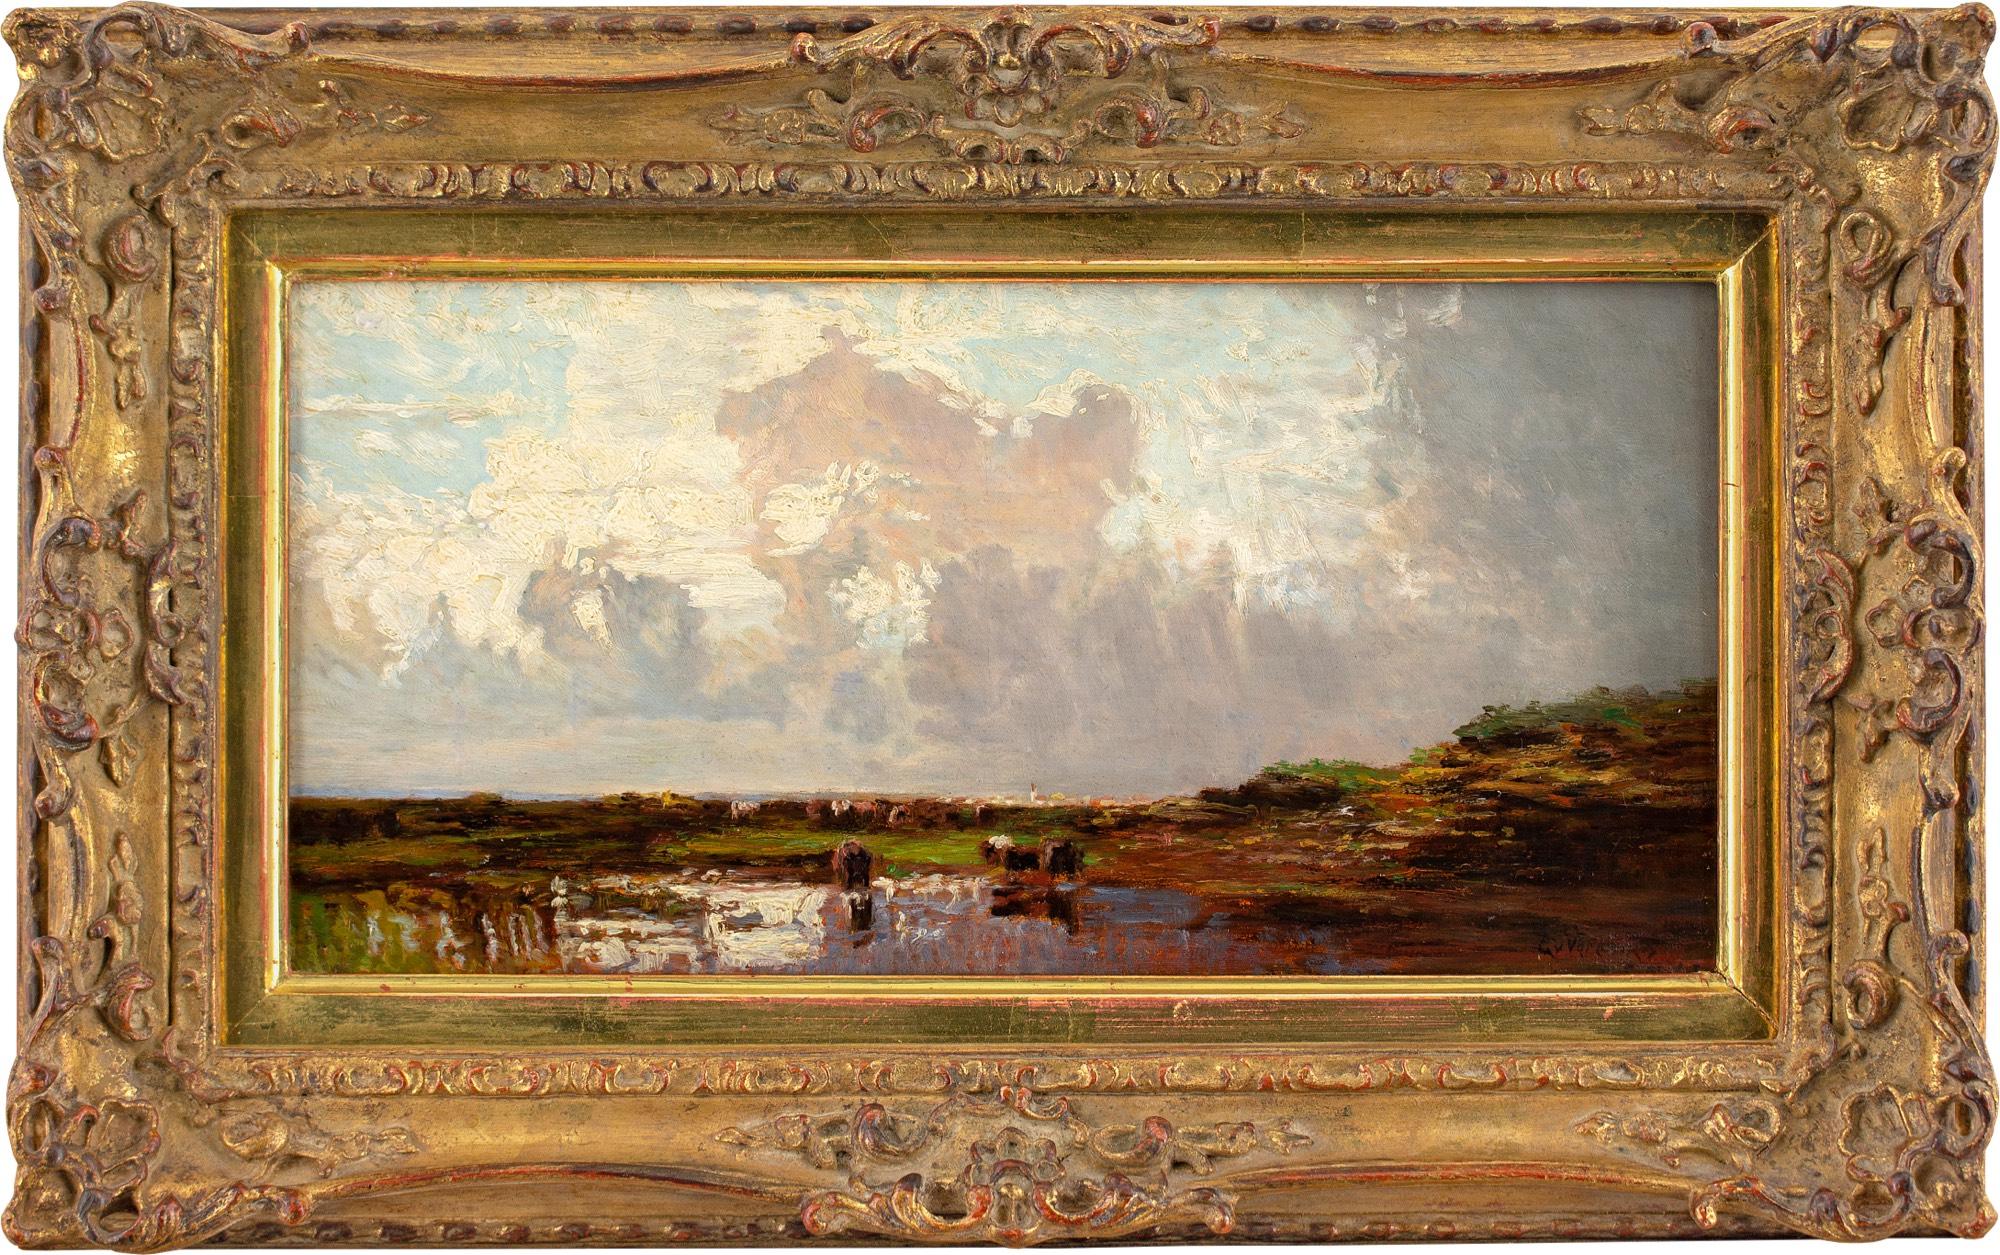 This expressive early 20th-century oil painting by German artist Emil von Varennes-Mondasse (1881-1949) depicts a landscape with cattle and dramatic sky.

Little is known about the career of Varennes-Mondasse, which is unusual given his ability. He